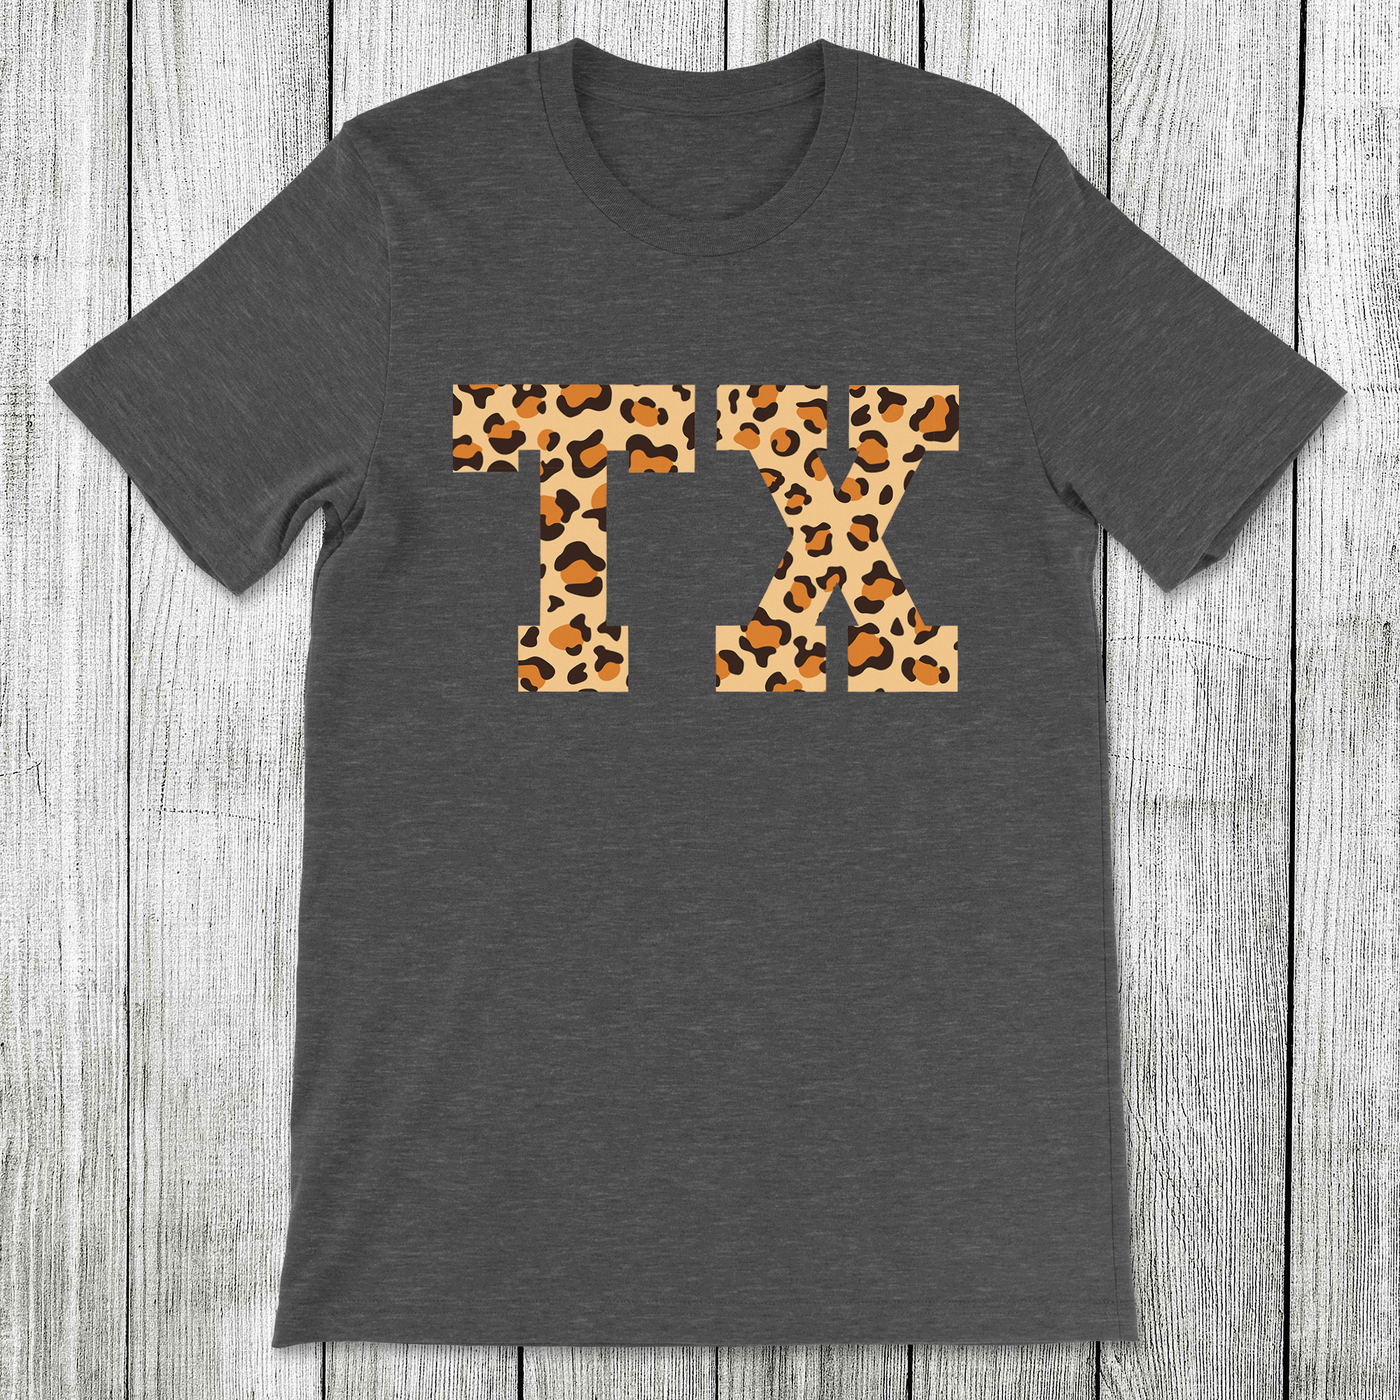 Daydream Tees State Leopard Texas